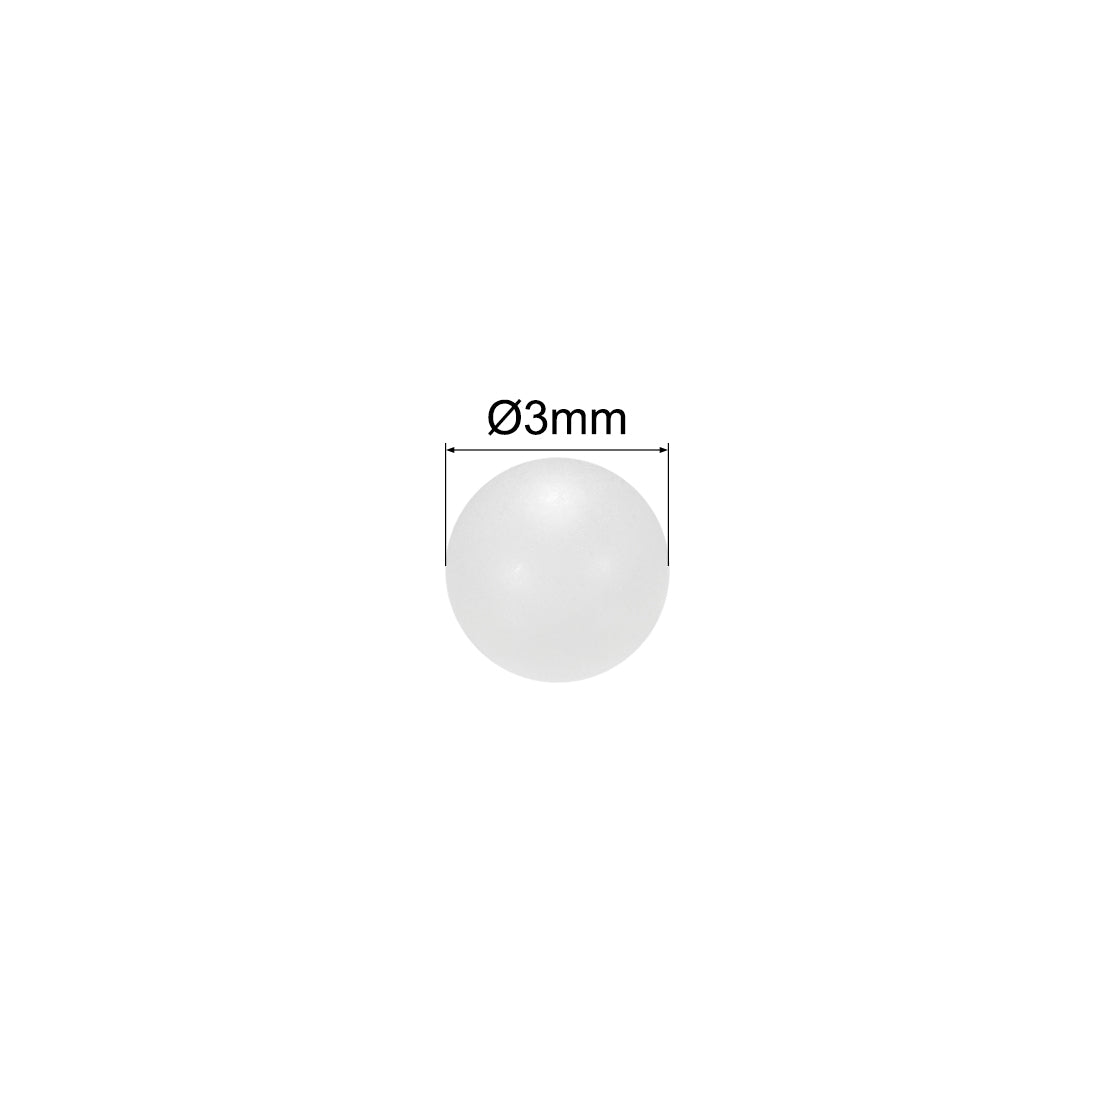 Uxcell Uxcell 7mm PP Solid Plastic Balls, Precision Bearing Ball 200pcs